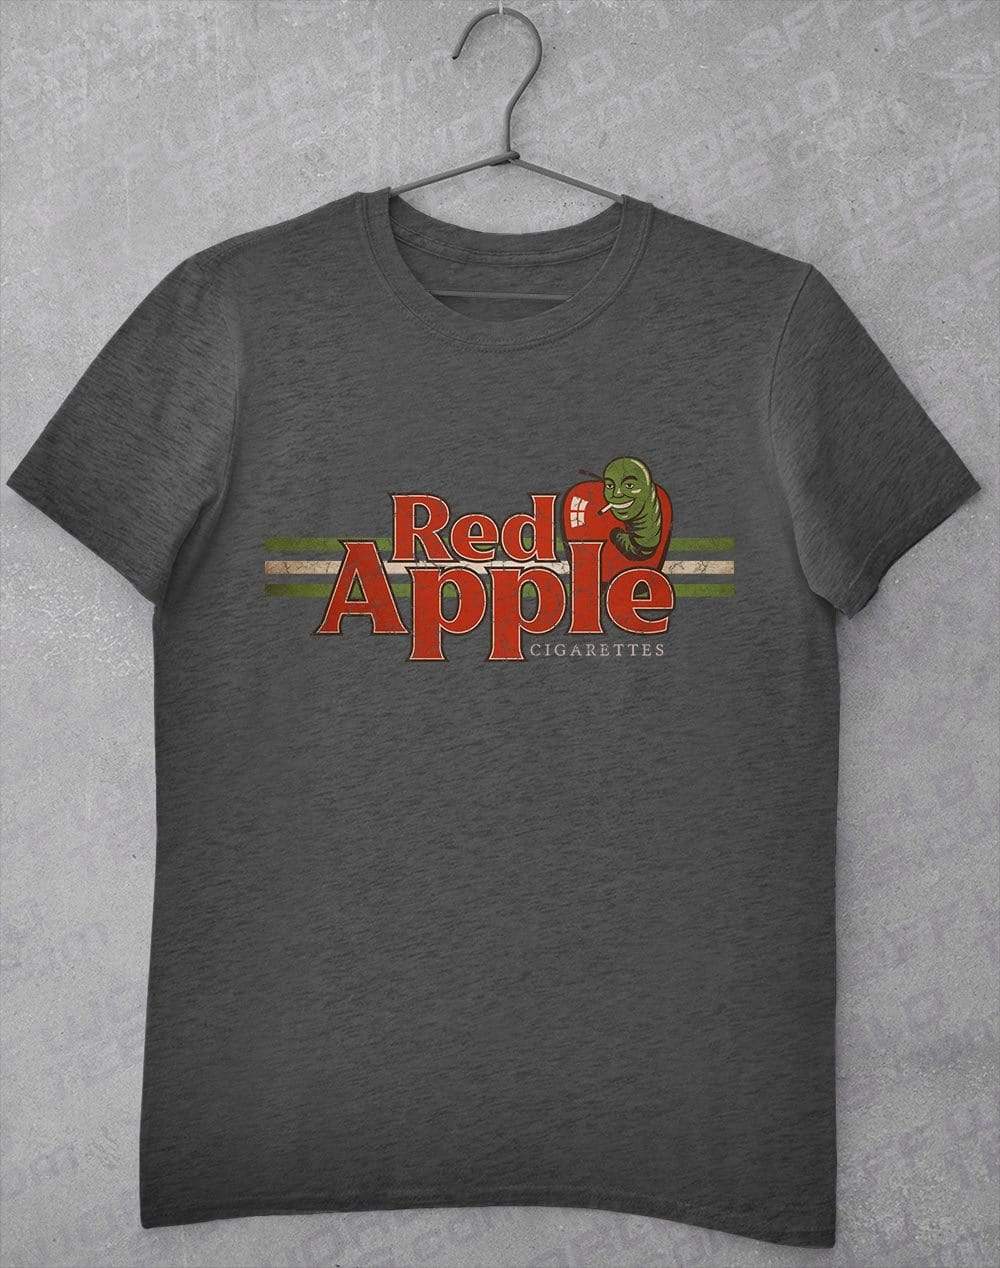 Red Apple Cigarettes T-Shirt S / Dark Heather  - Off World Tees